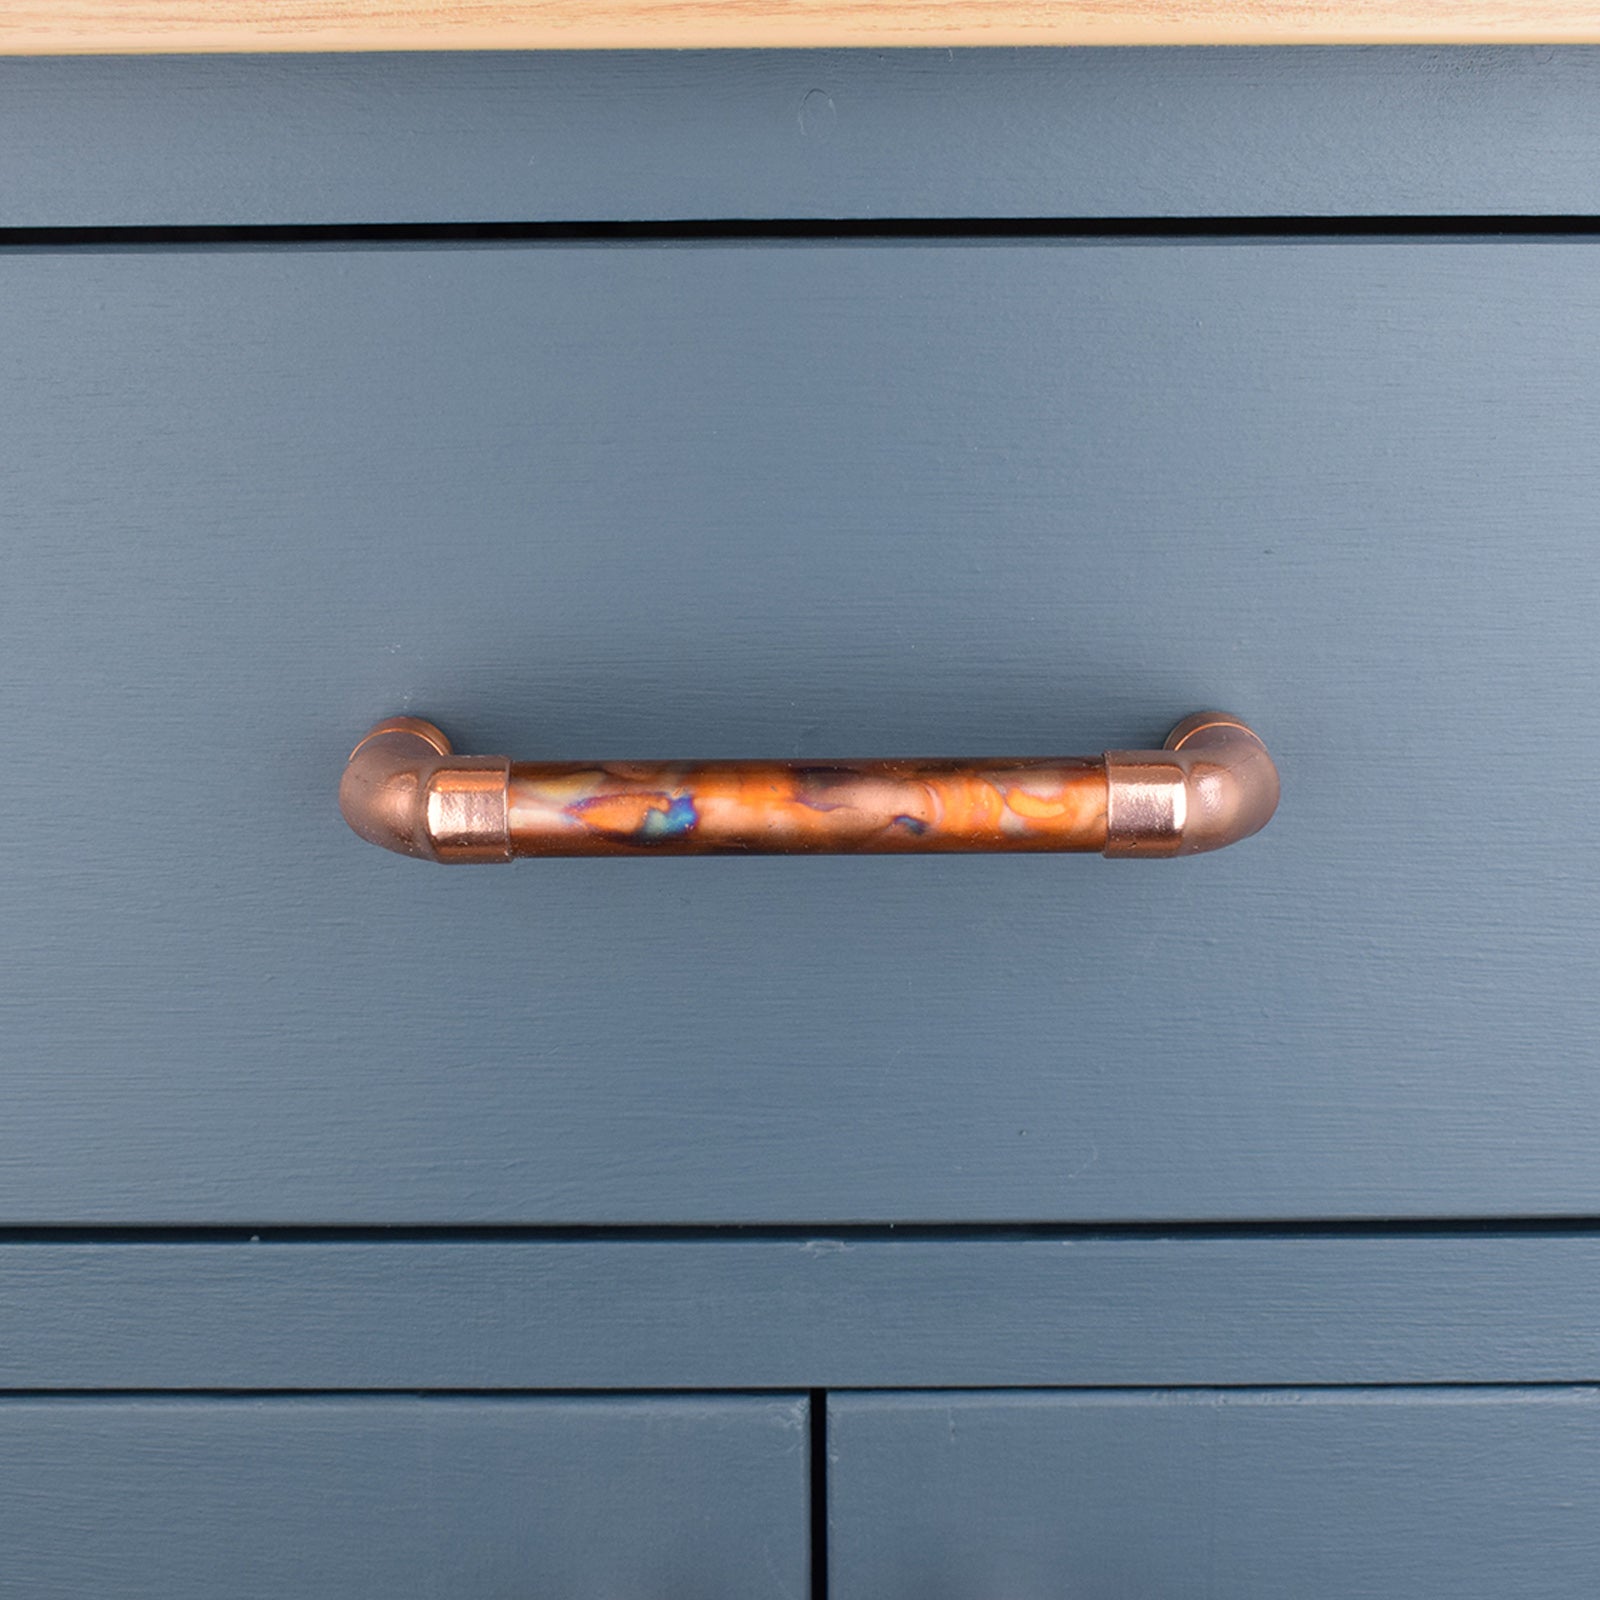 Copper Pull Handle - Marbled / High Polish Mix - On blue kitchen drawers